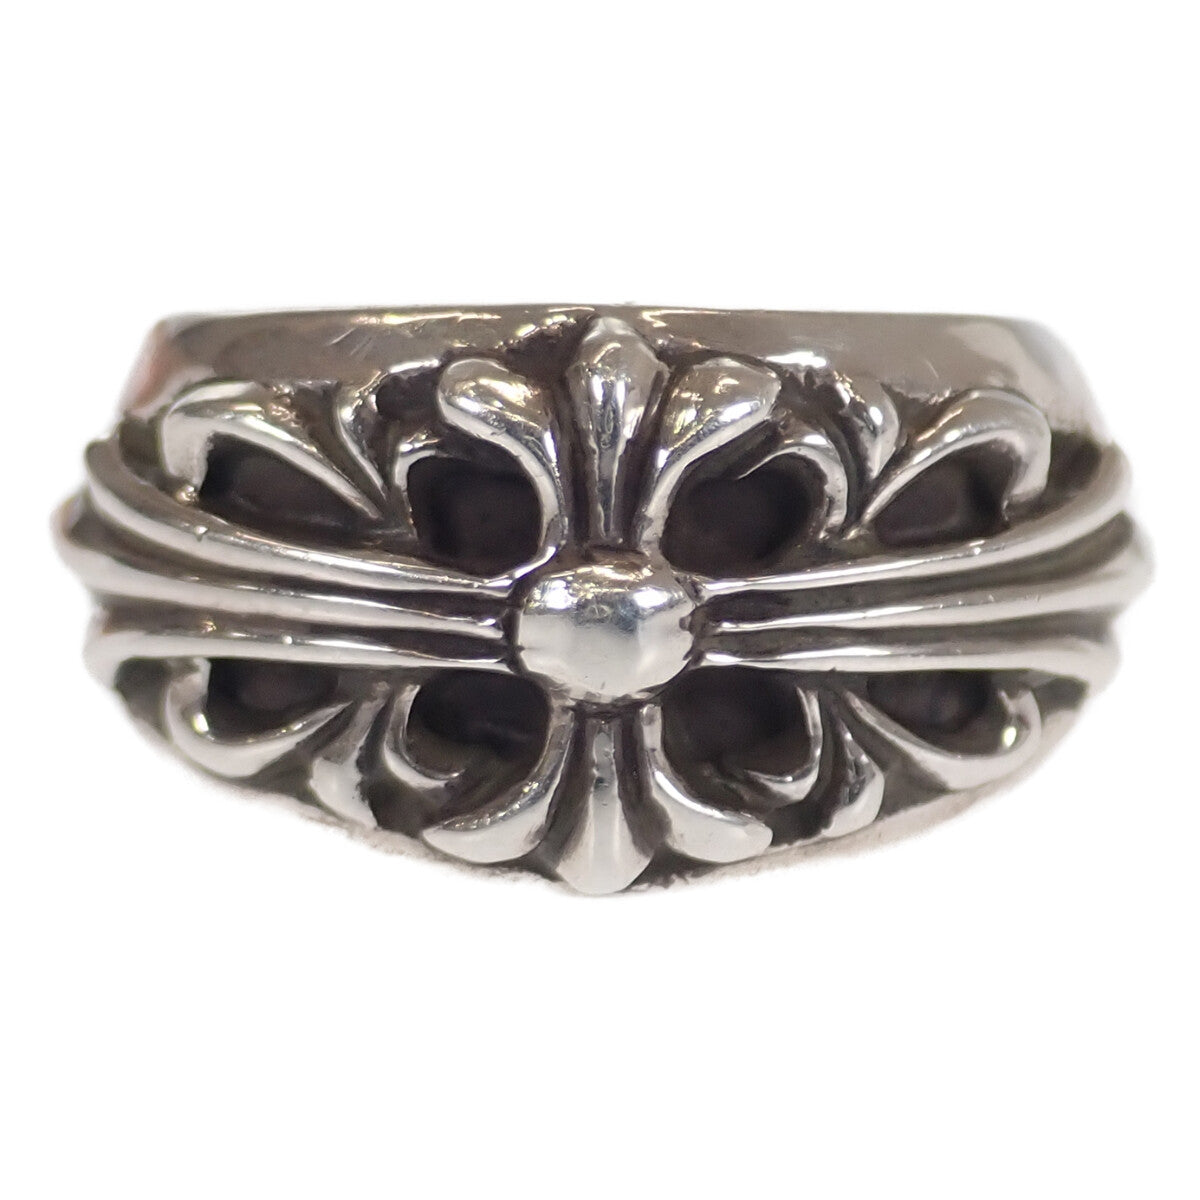 Silver Floral Cross Ring 2356-304-0500-9110